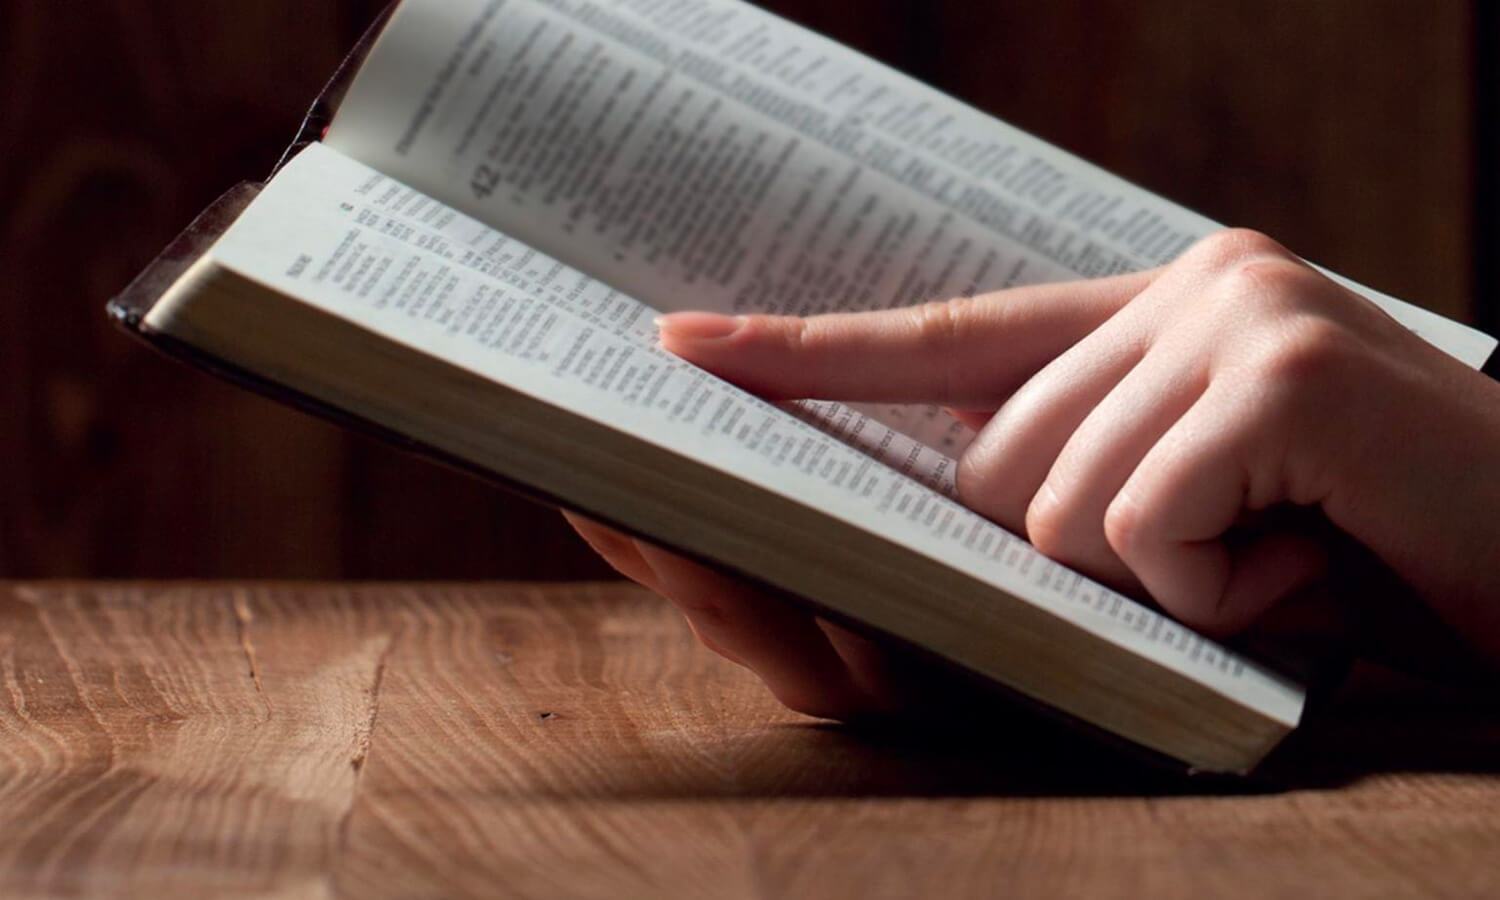 Why are there different views on the value of the Bible?